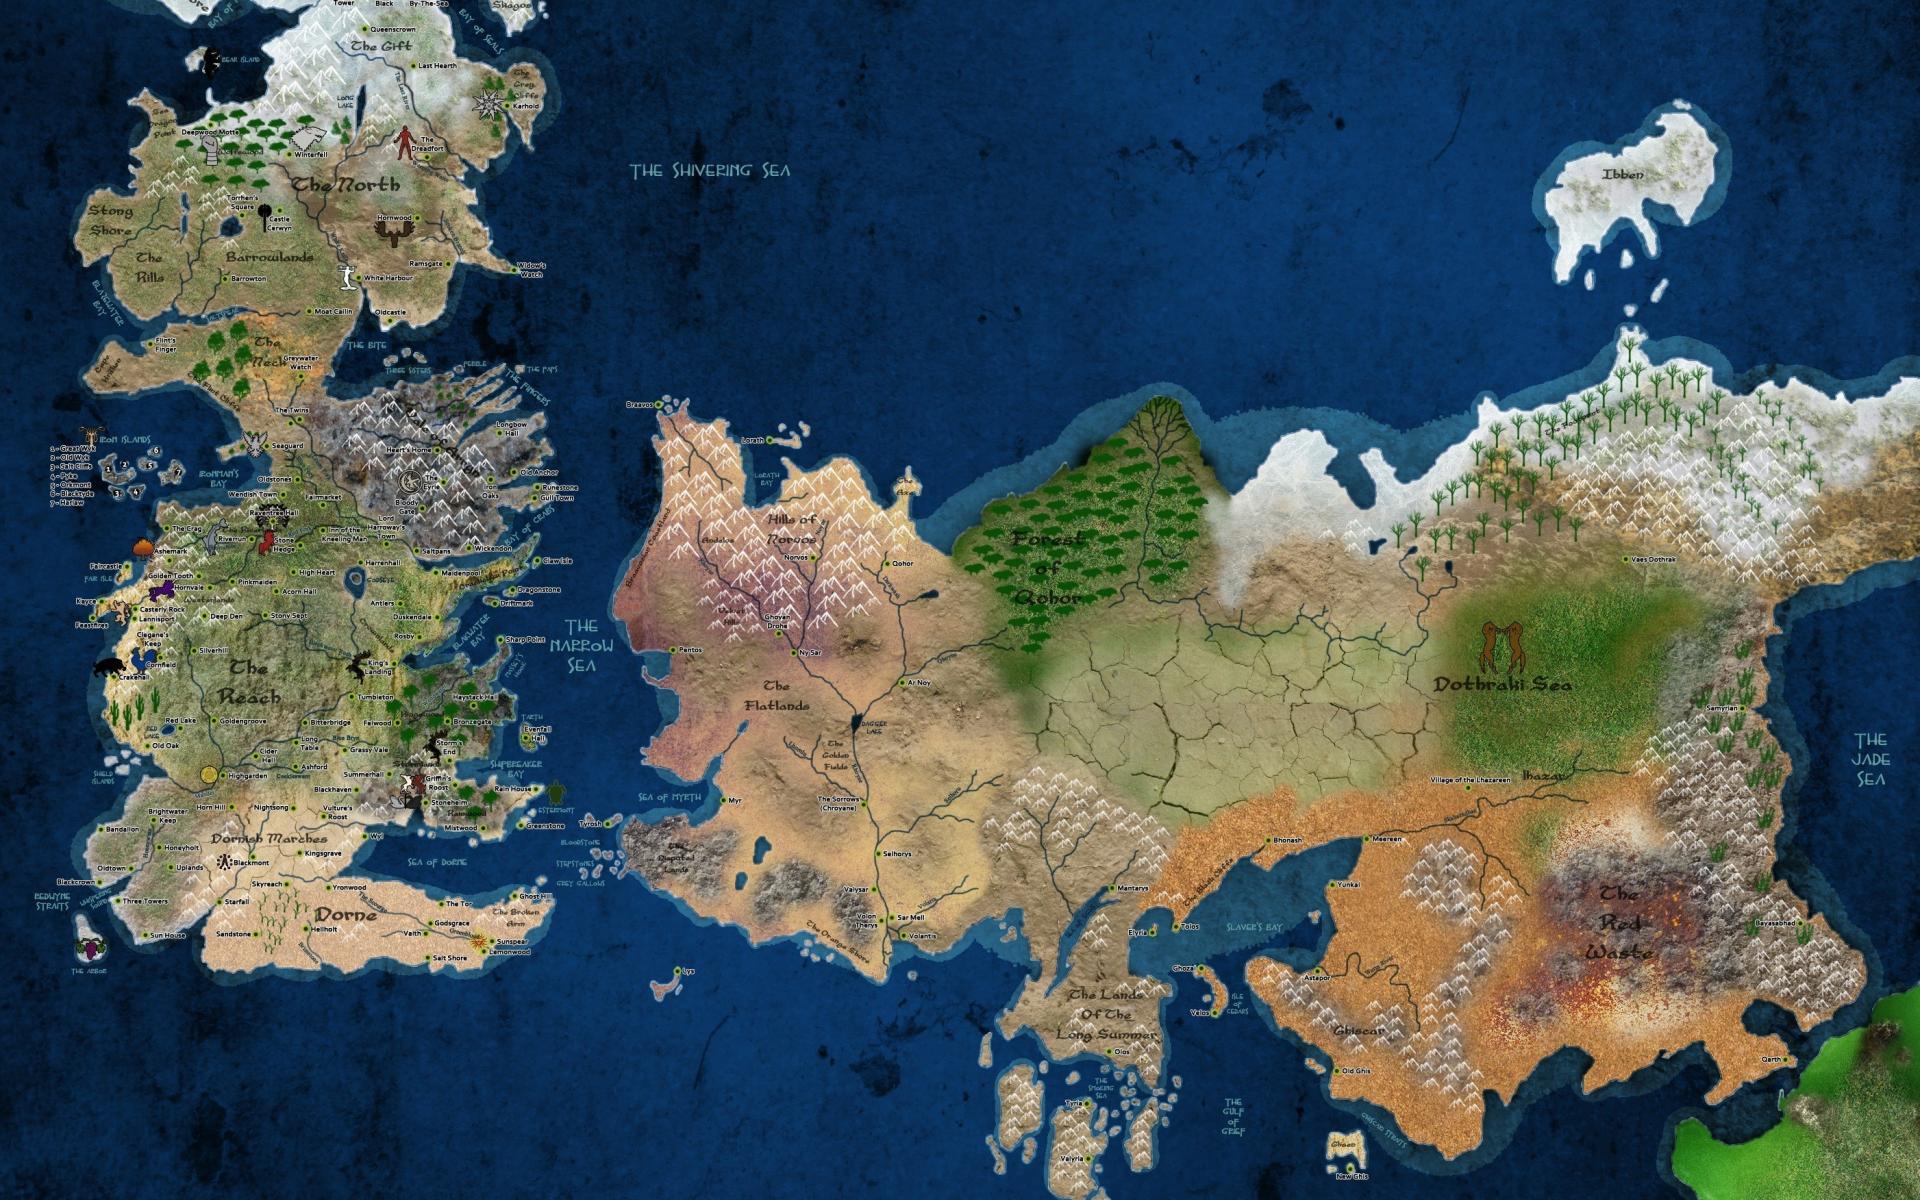 Game Of Thrones Map Wallpaper Hd 1920x1080 Game Fans Hub